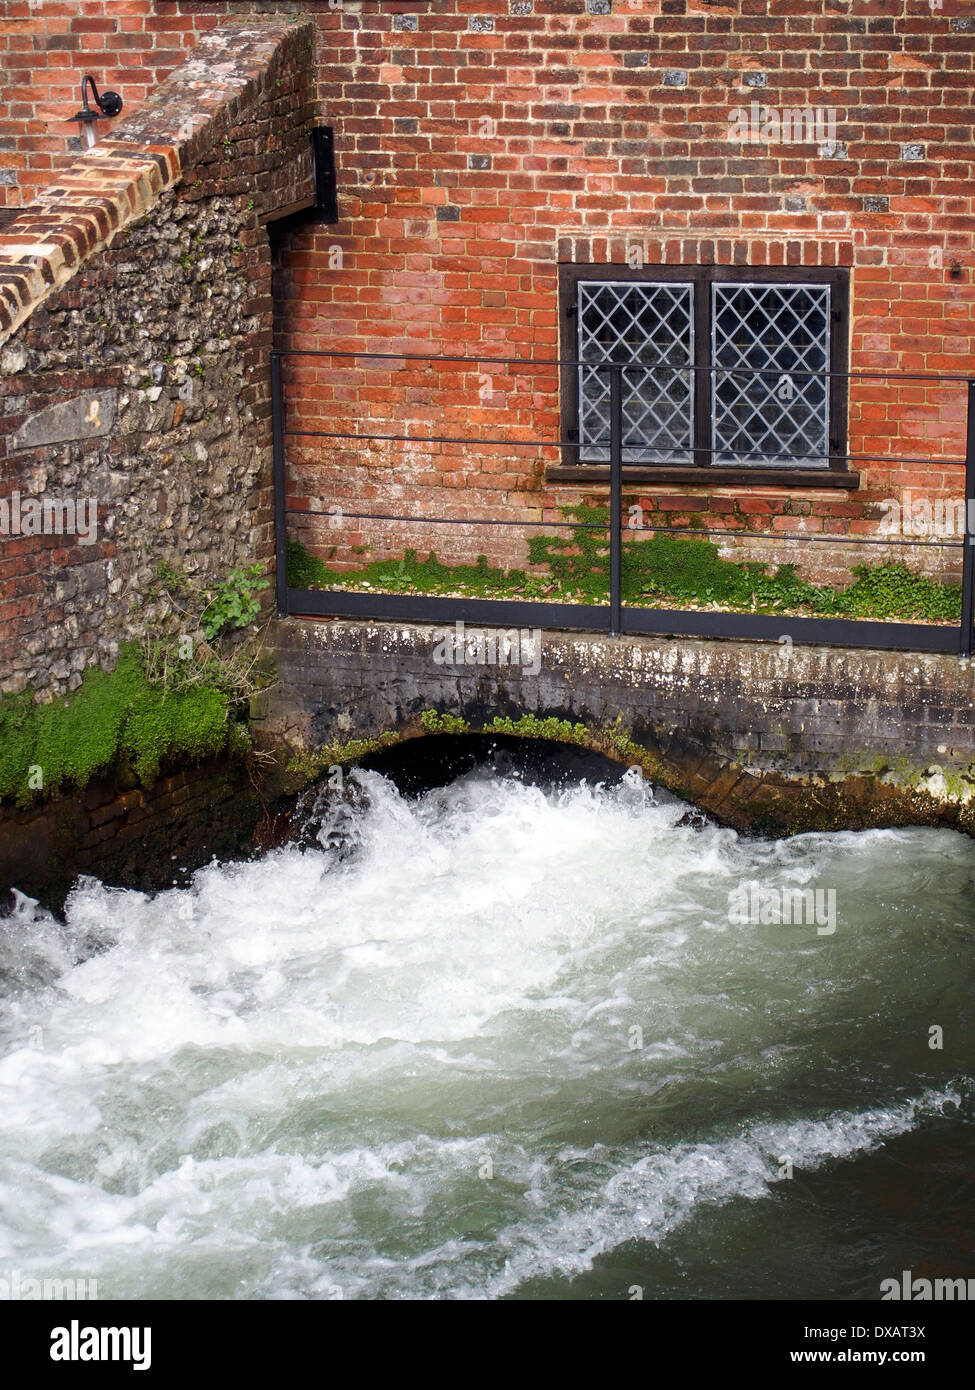 A torrent of water flows from the wheel pit of Winchester City Mill, a watermill in the heart of this historic city. Stock Photo